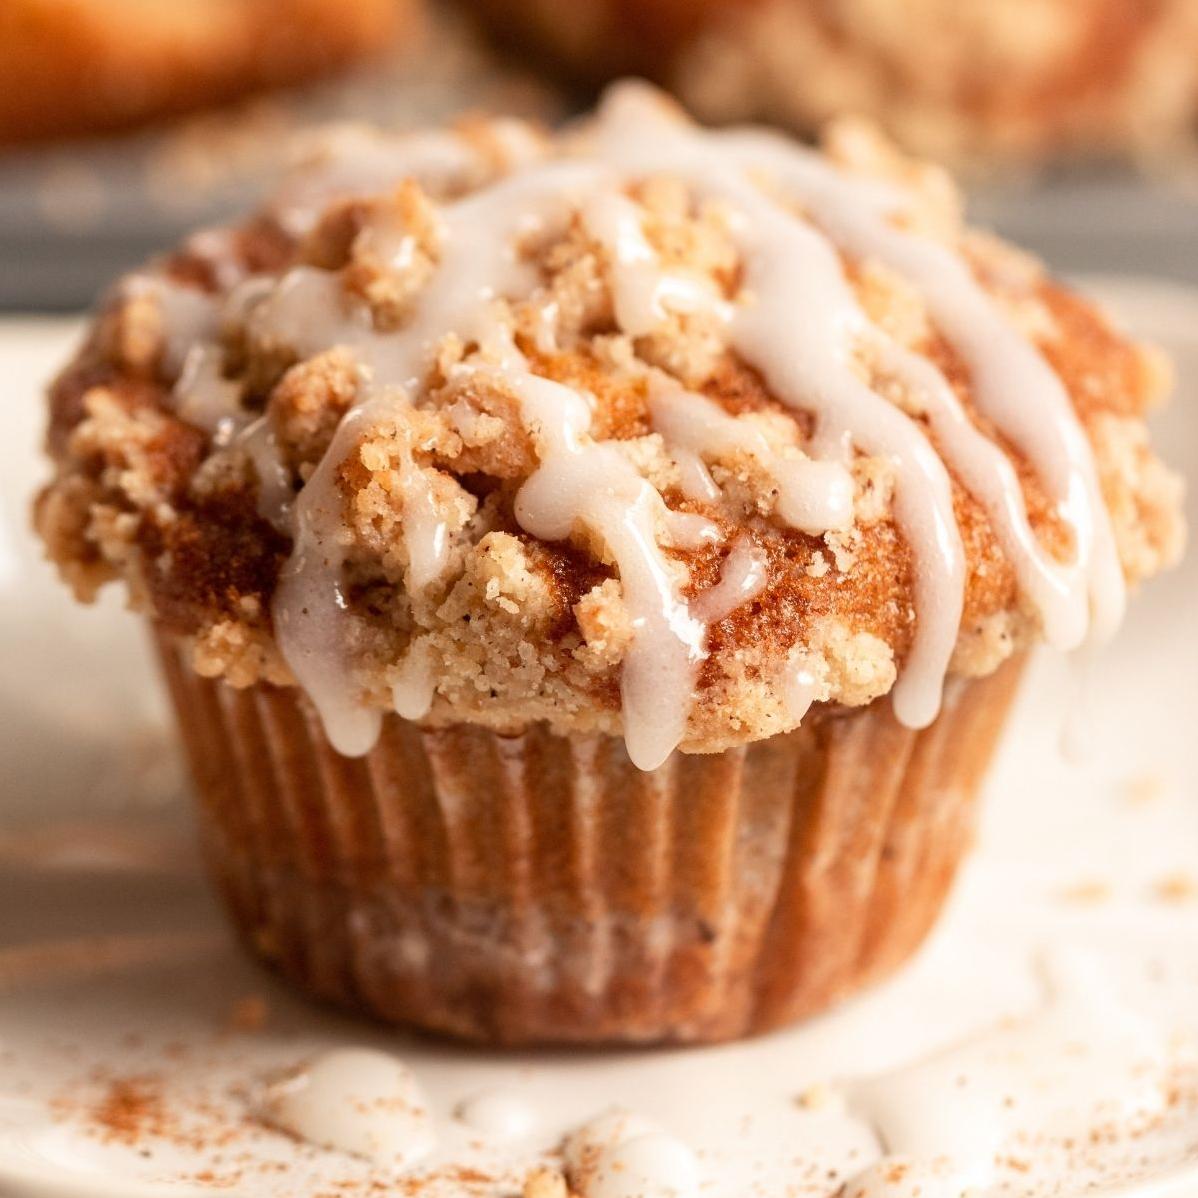  These muffins provide the perfect balance of caffeine and sugar to start your day off right.